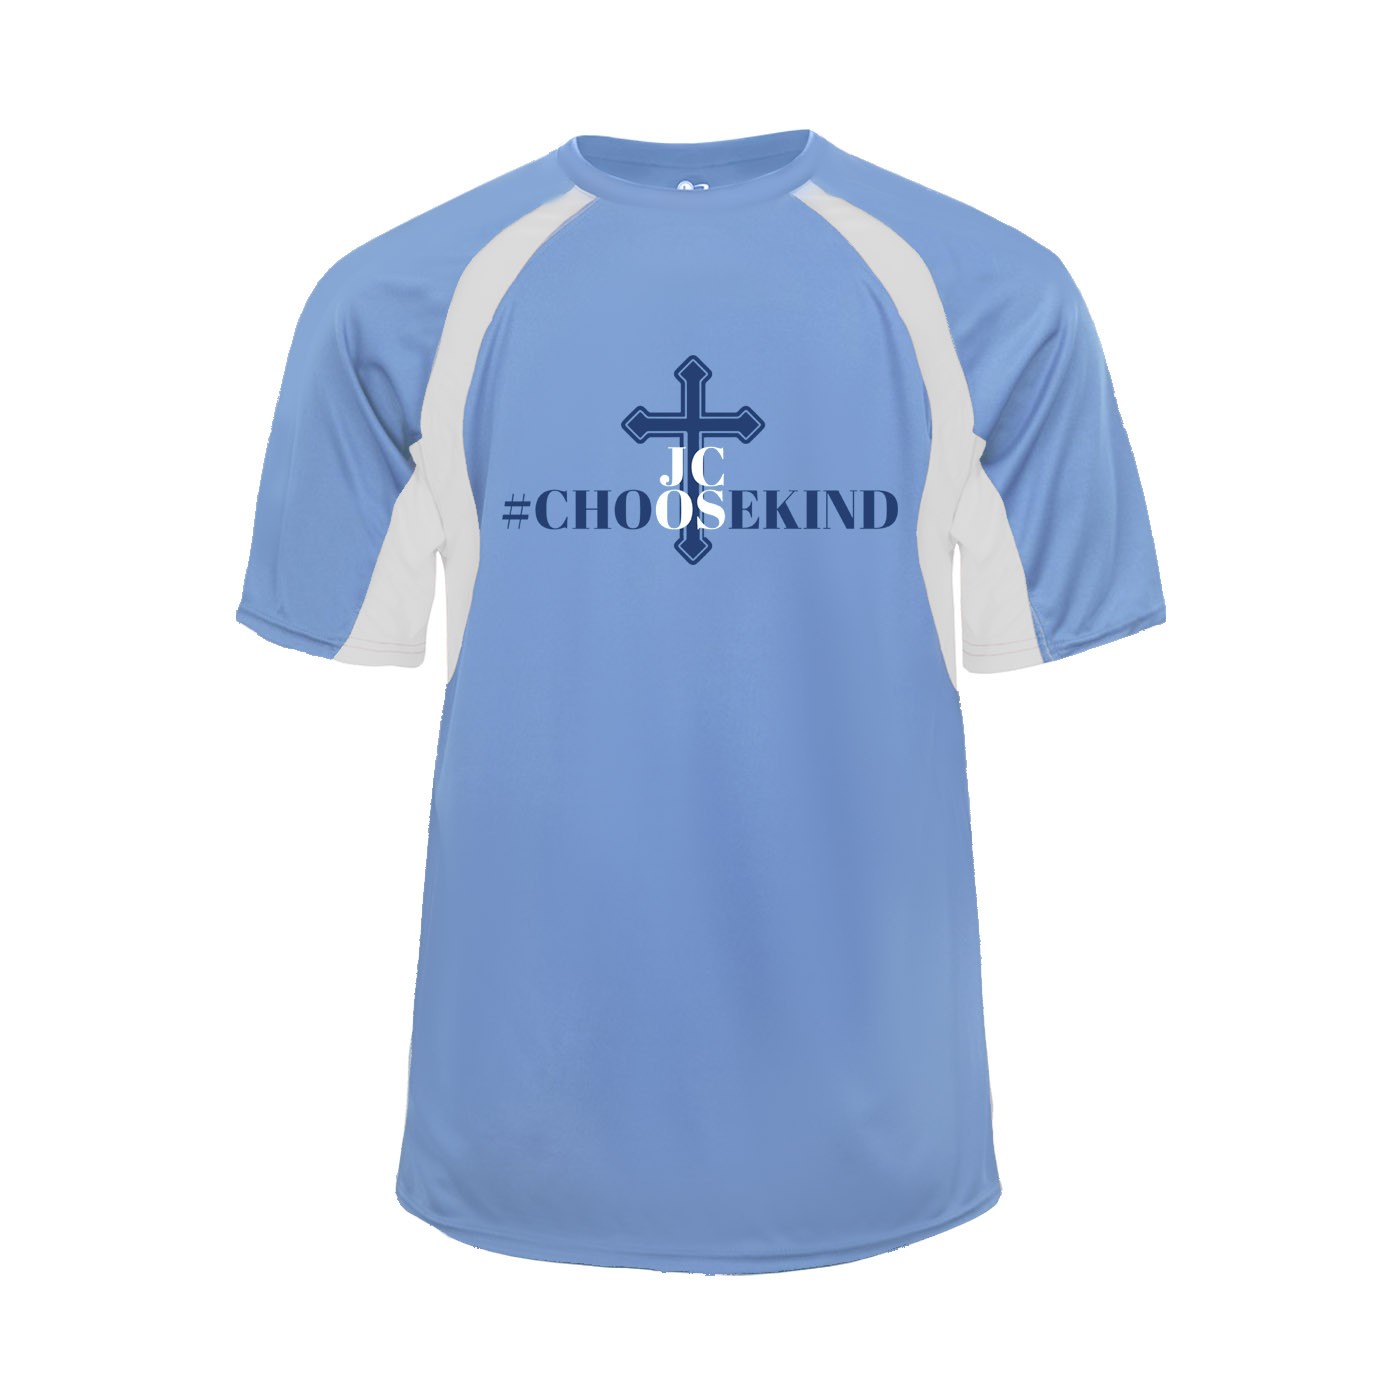 JCOS Staff Hook S/S T-Shirt w/ Choose Kind Logo #F34- Please Allow 3-4 Weeks for Delivery